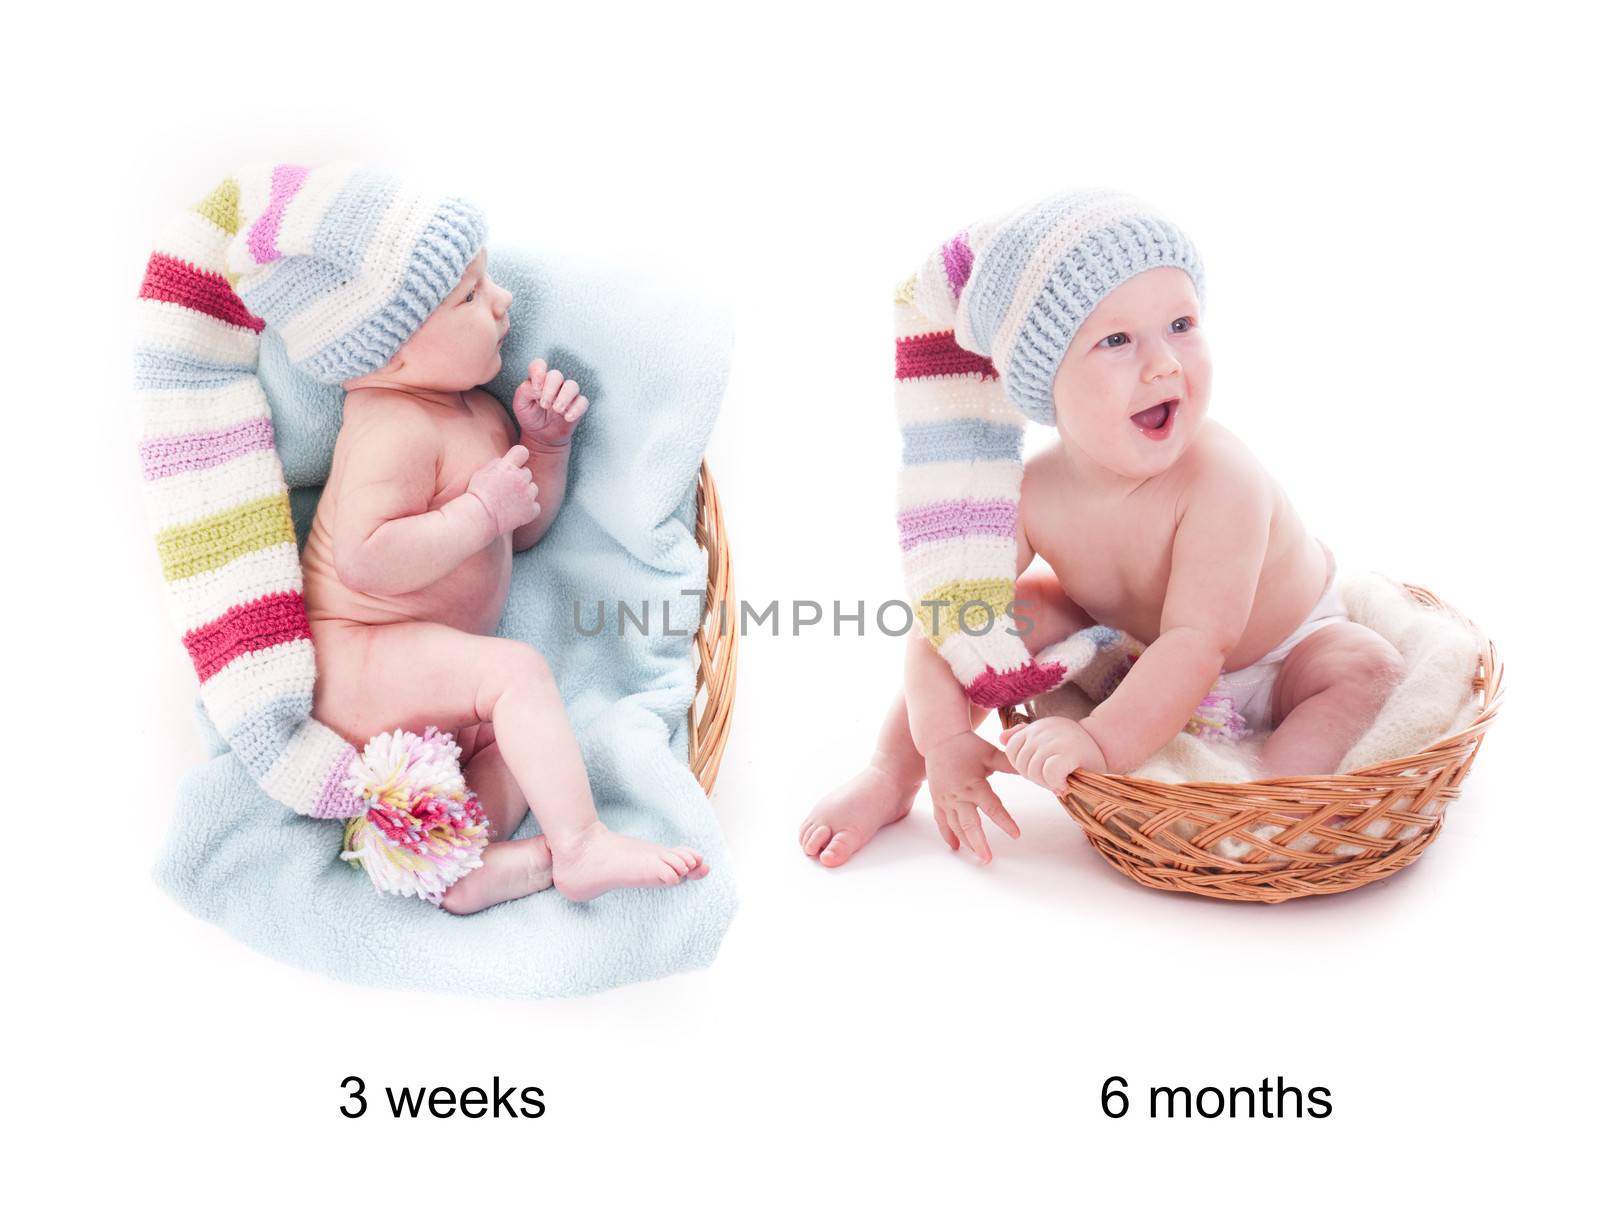 How quickly baby grow. Photo of 3 weeks baby and 6 months